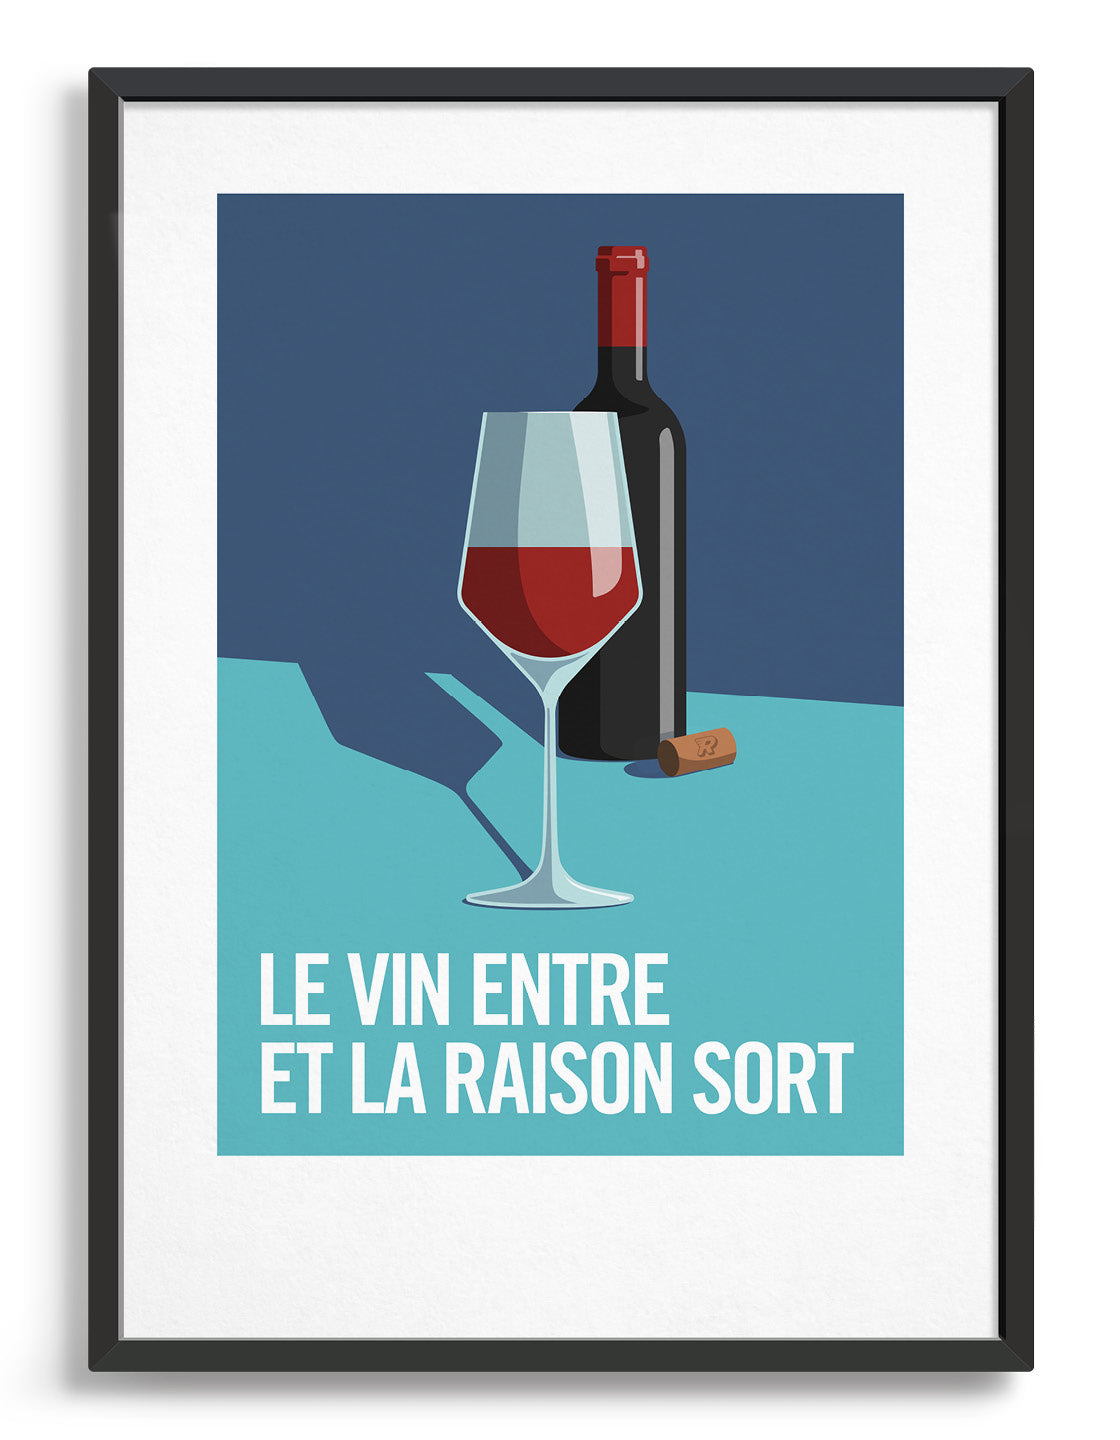 image depicts a bottle of red wine and a half filled glass with a discarded cork. Set against a blue and turquoise background